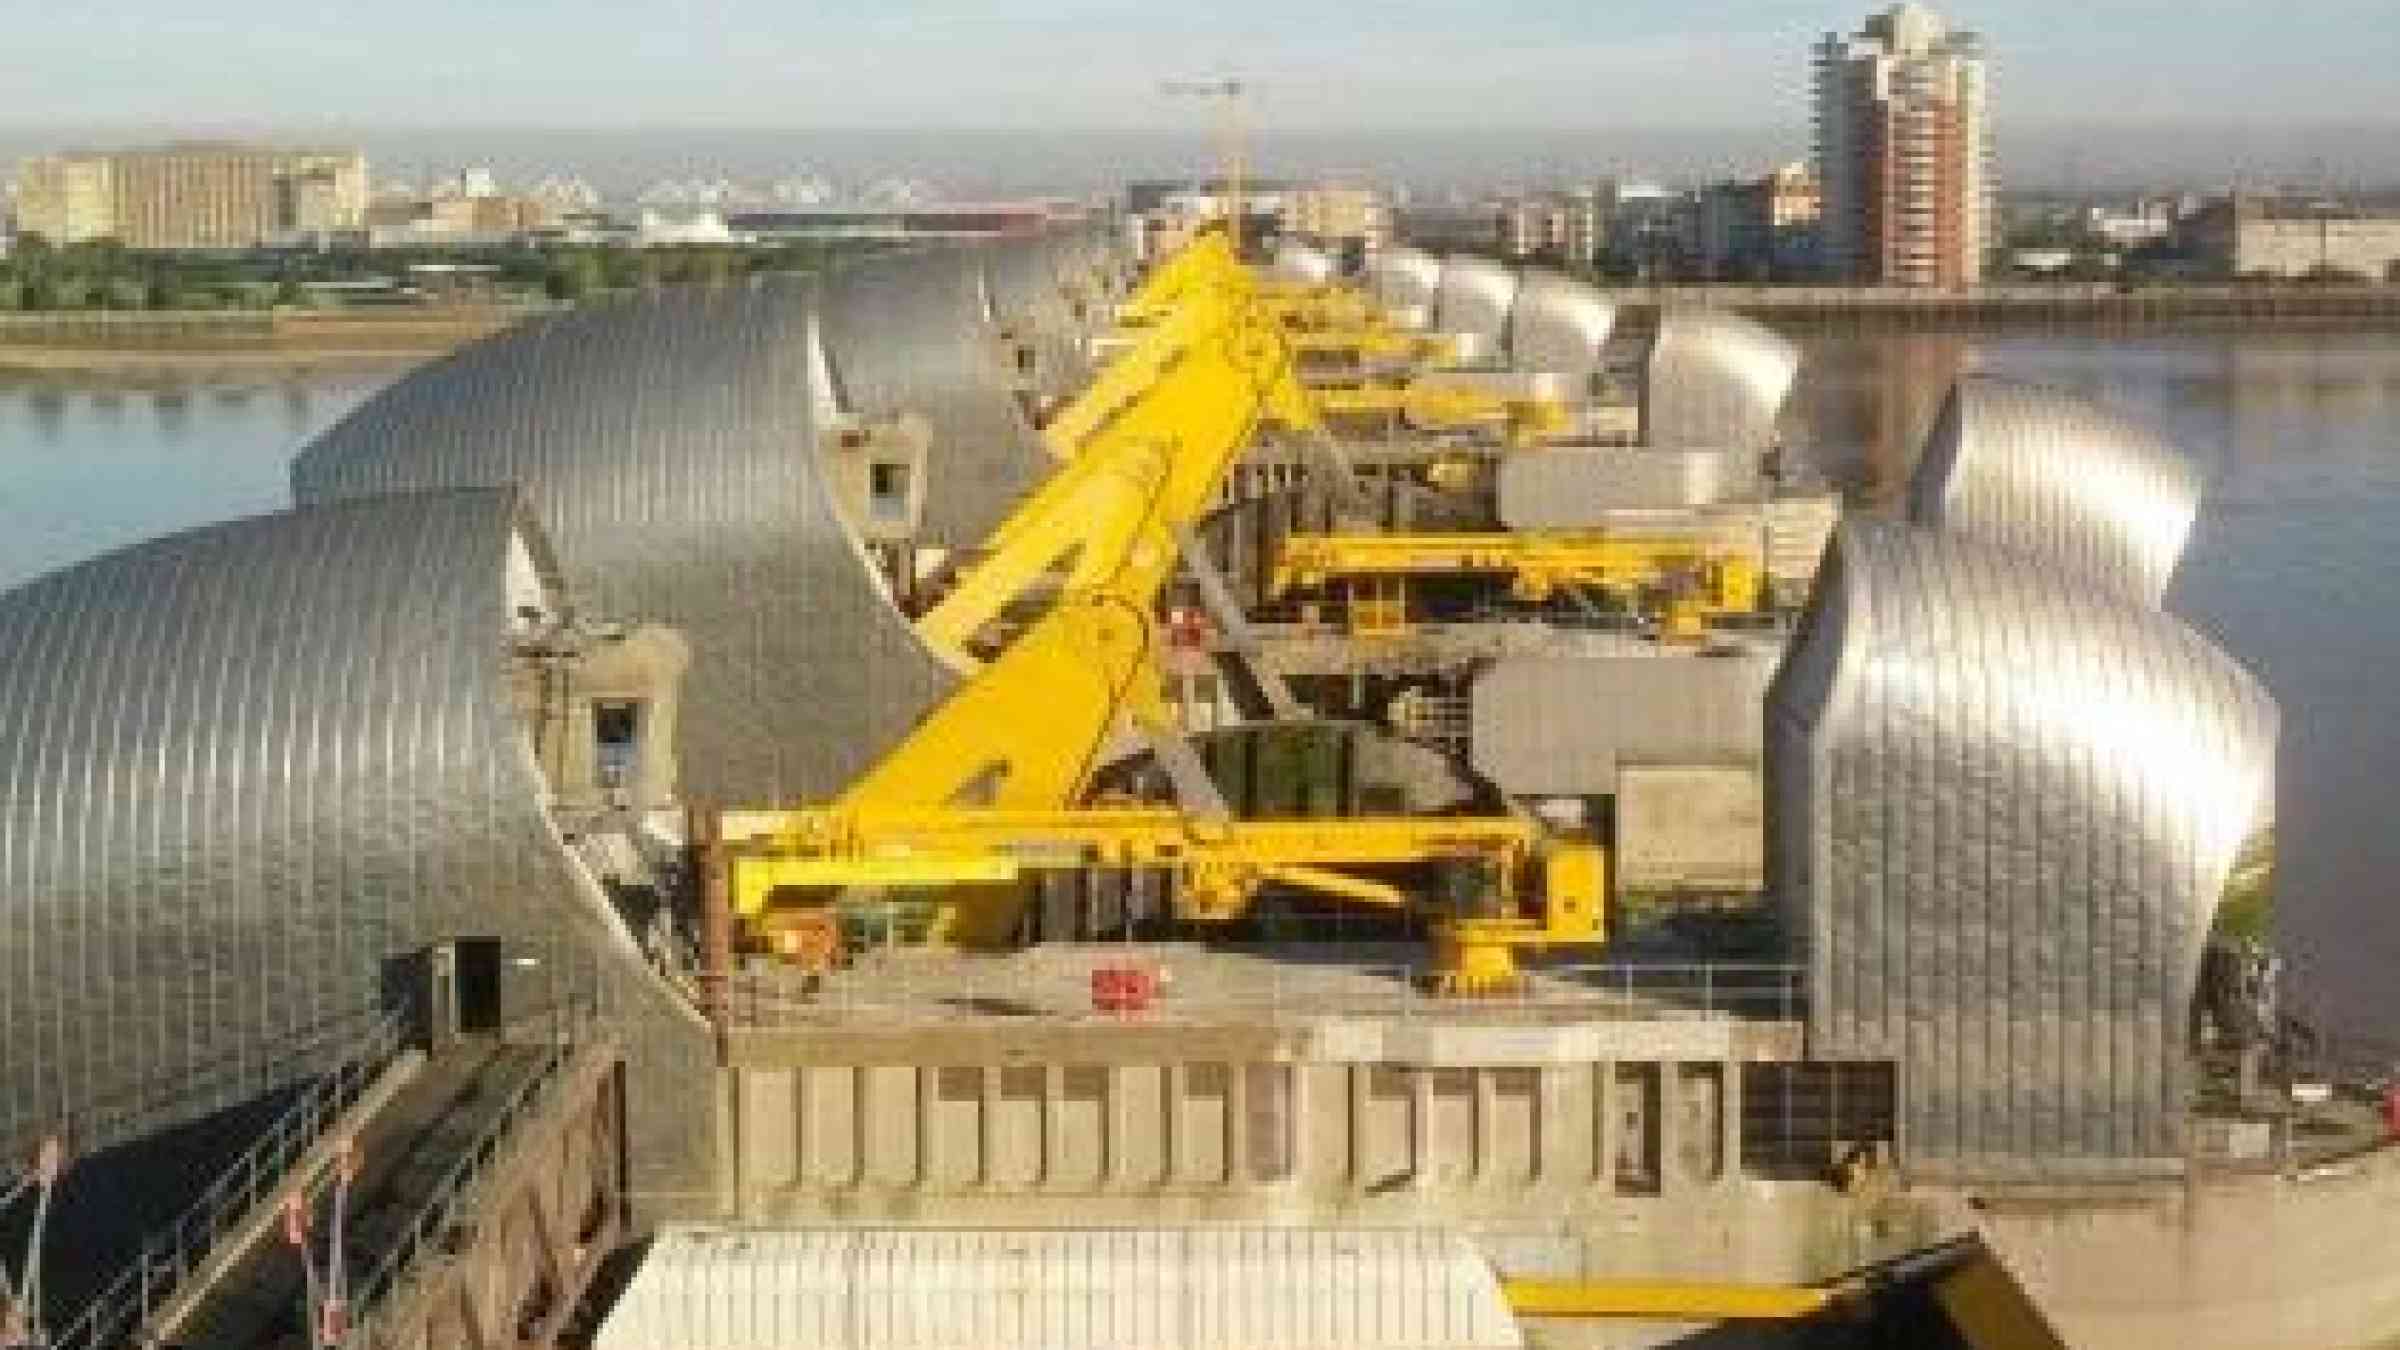 The Thames Barrier is one of the largest movable flood barriers in the world (Photo: Environment Agency)